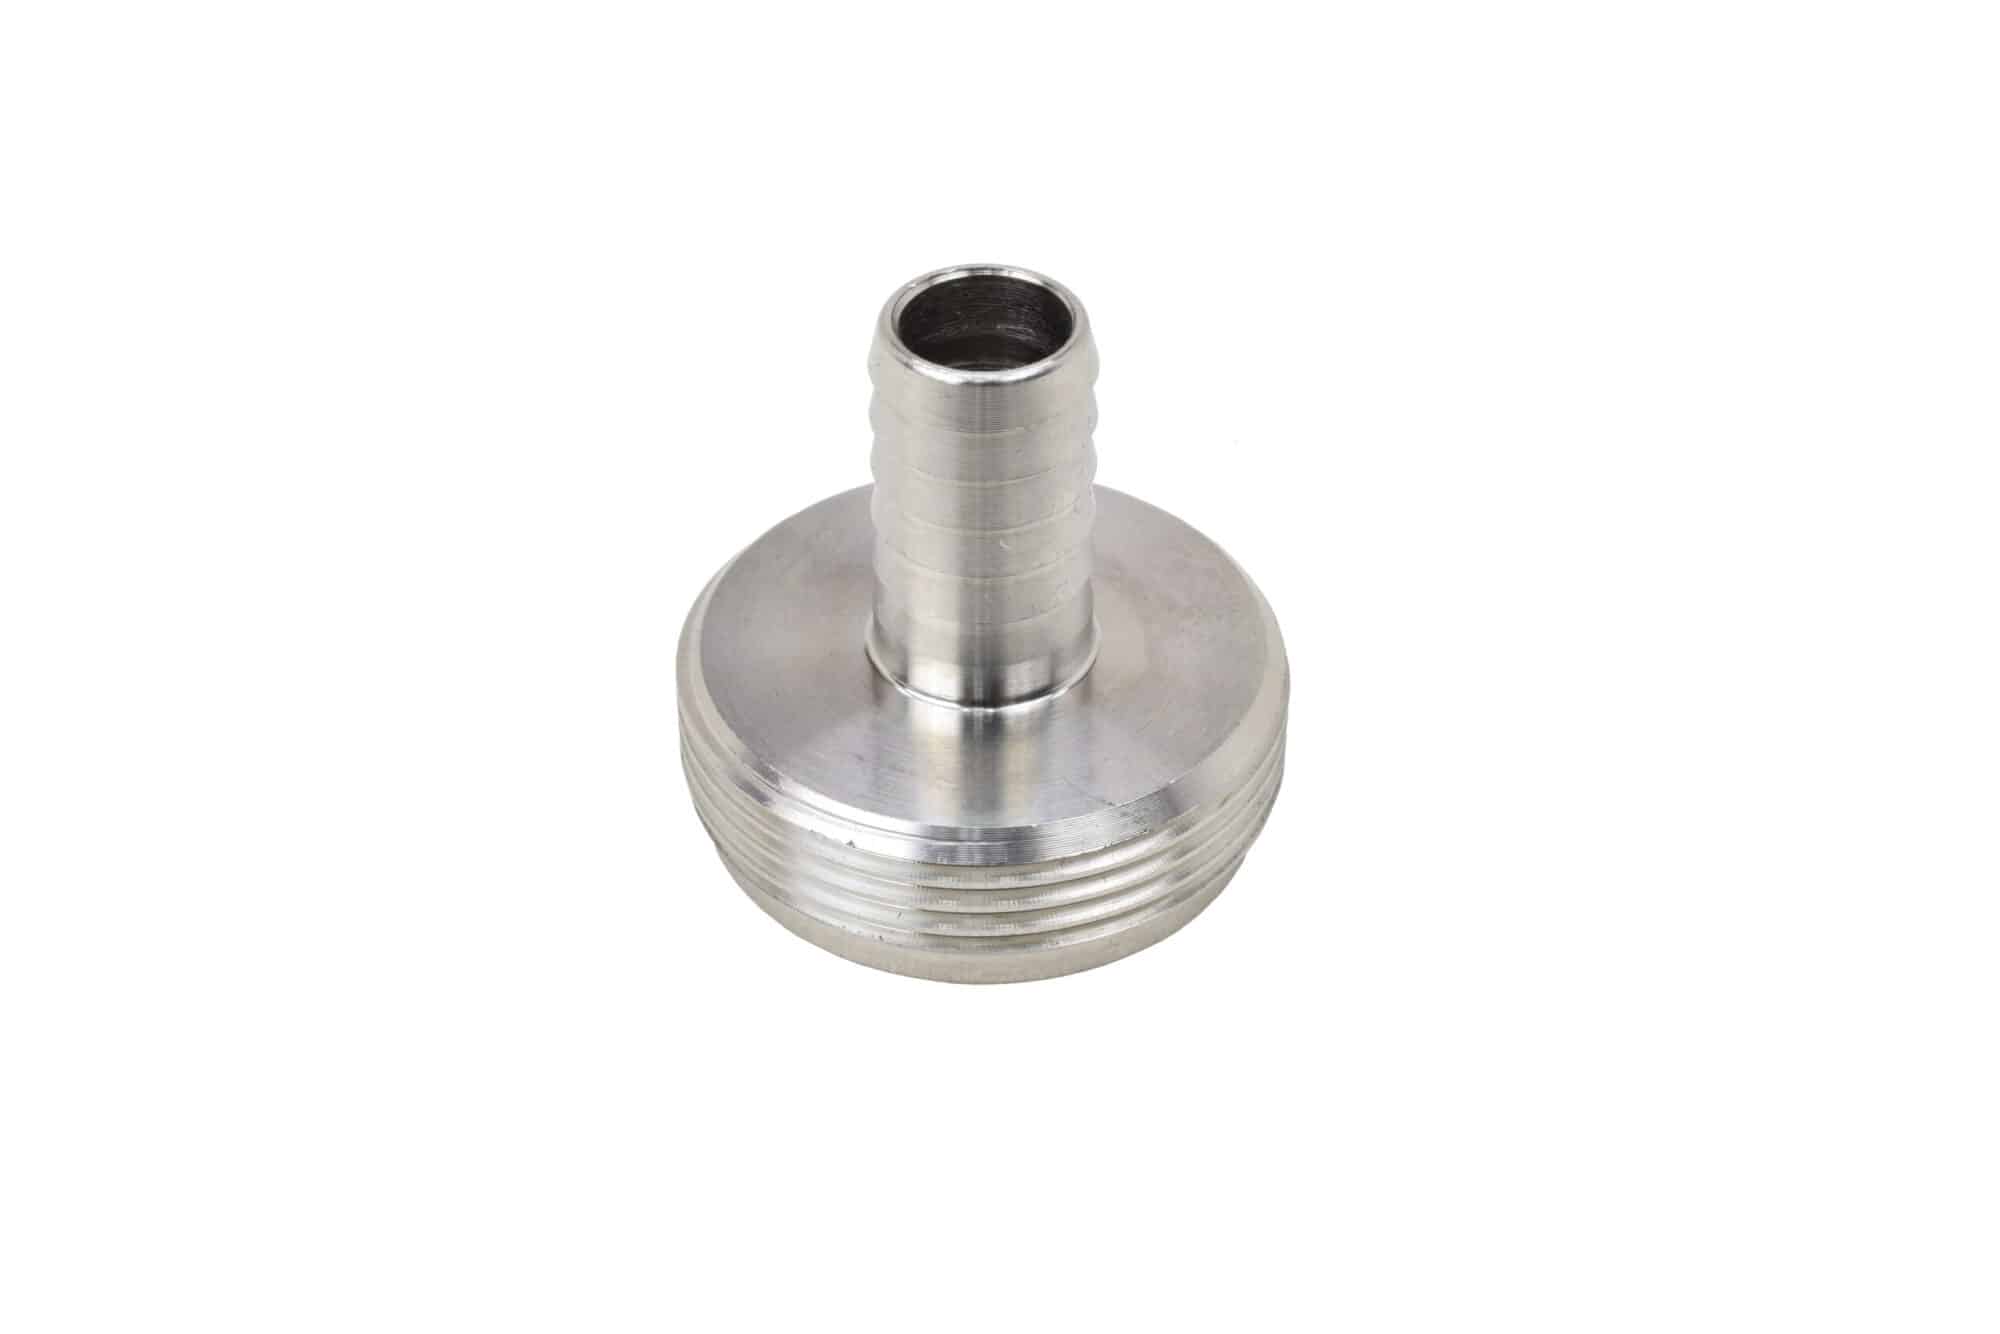 254S - One Piece Stainless Steel Cleaning Attachment - Fits 3/8" ID Vinyl